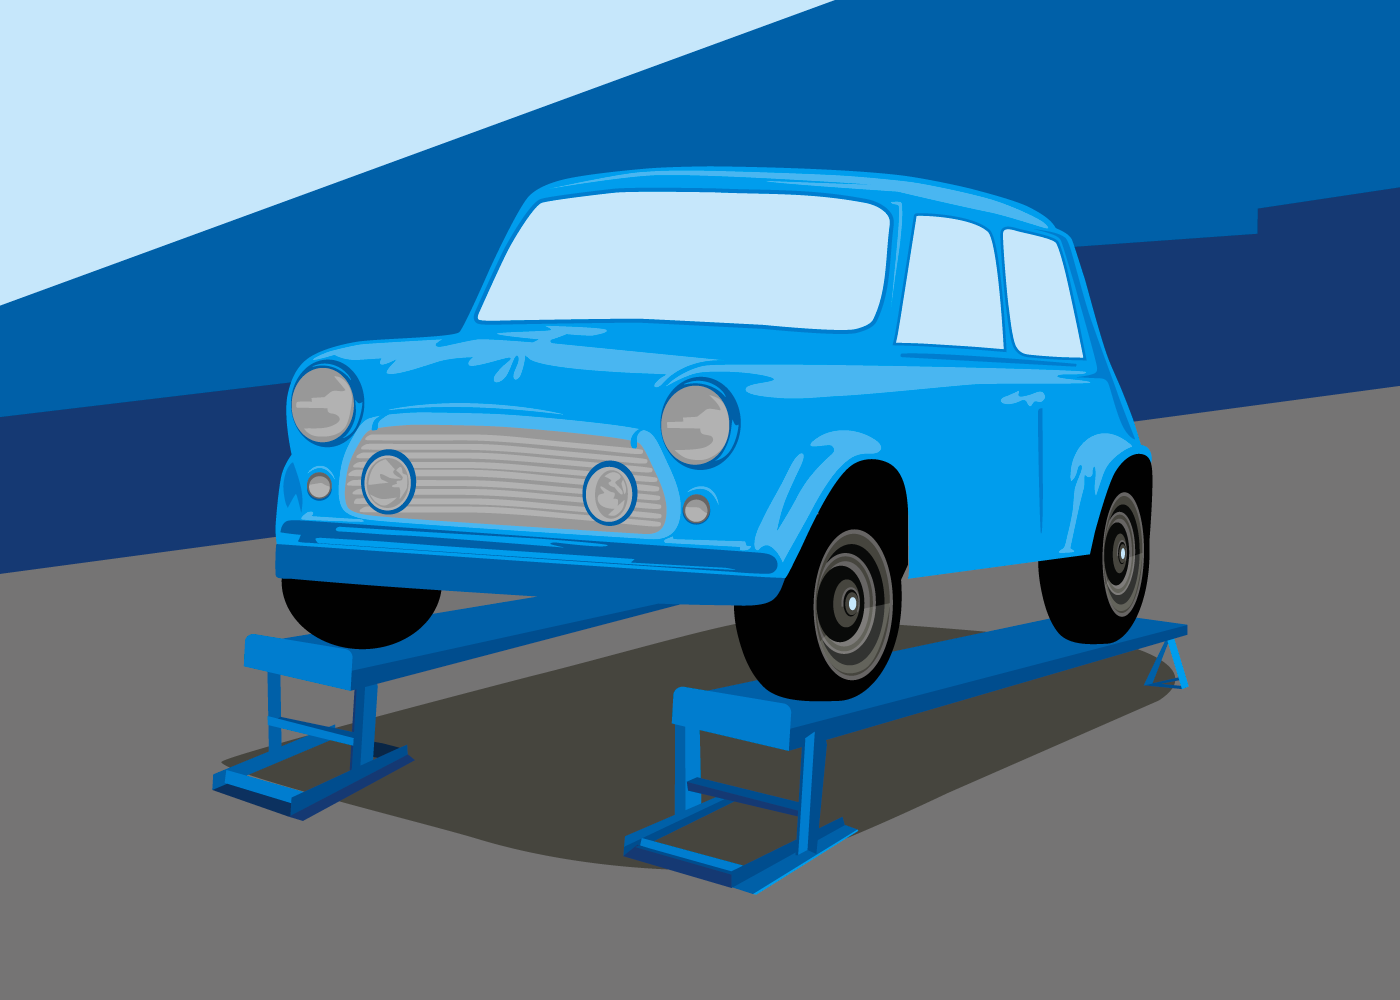 Illustration of a small car on a stand so it can be restored